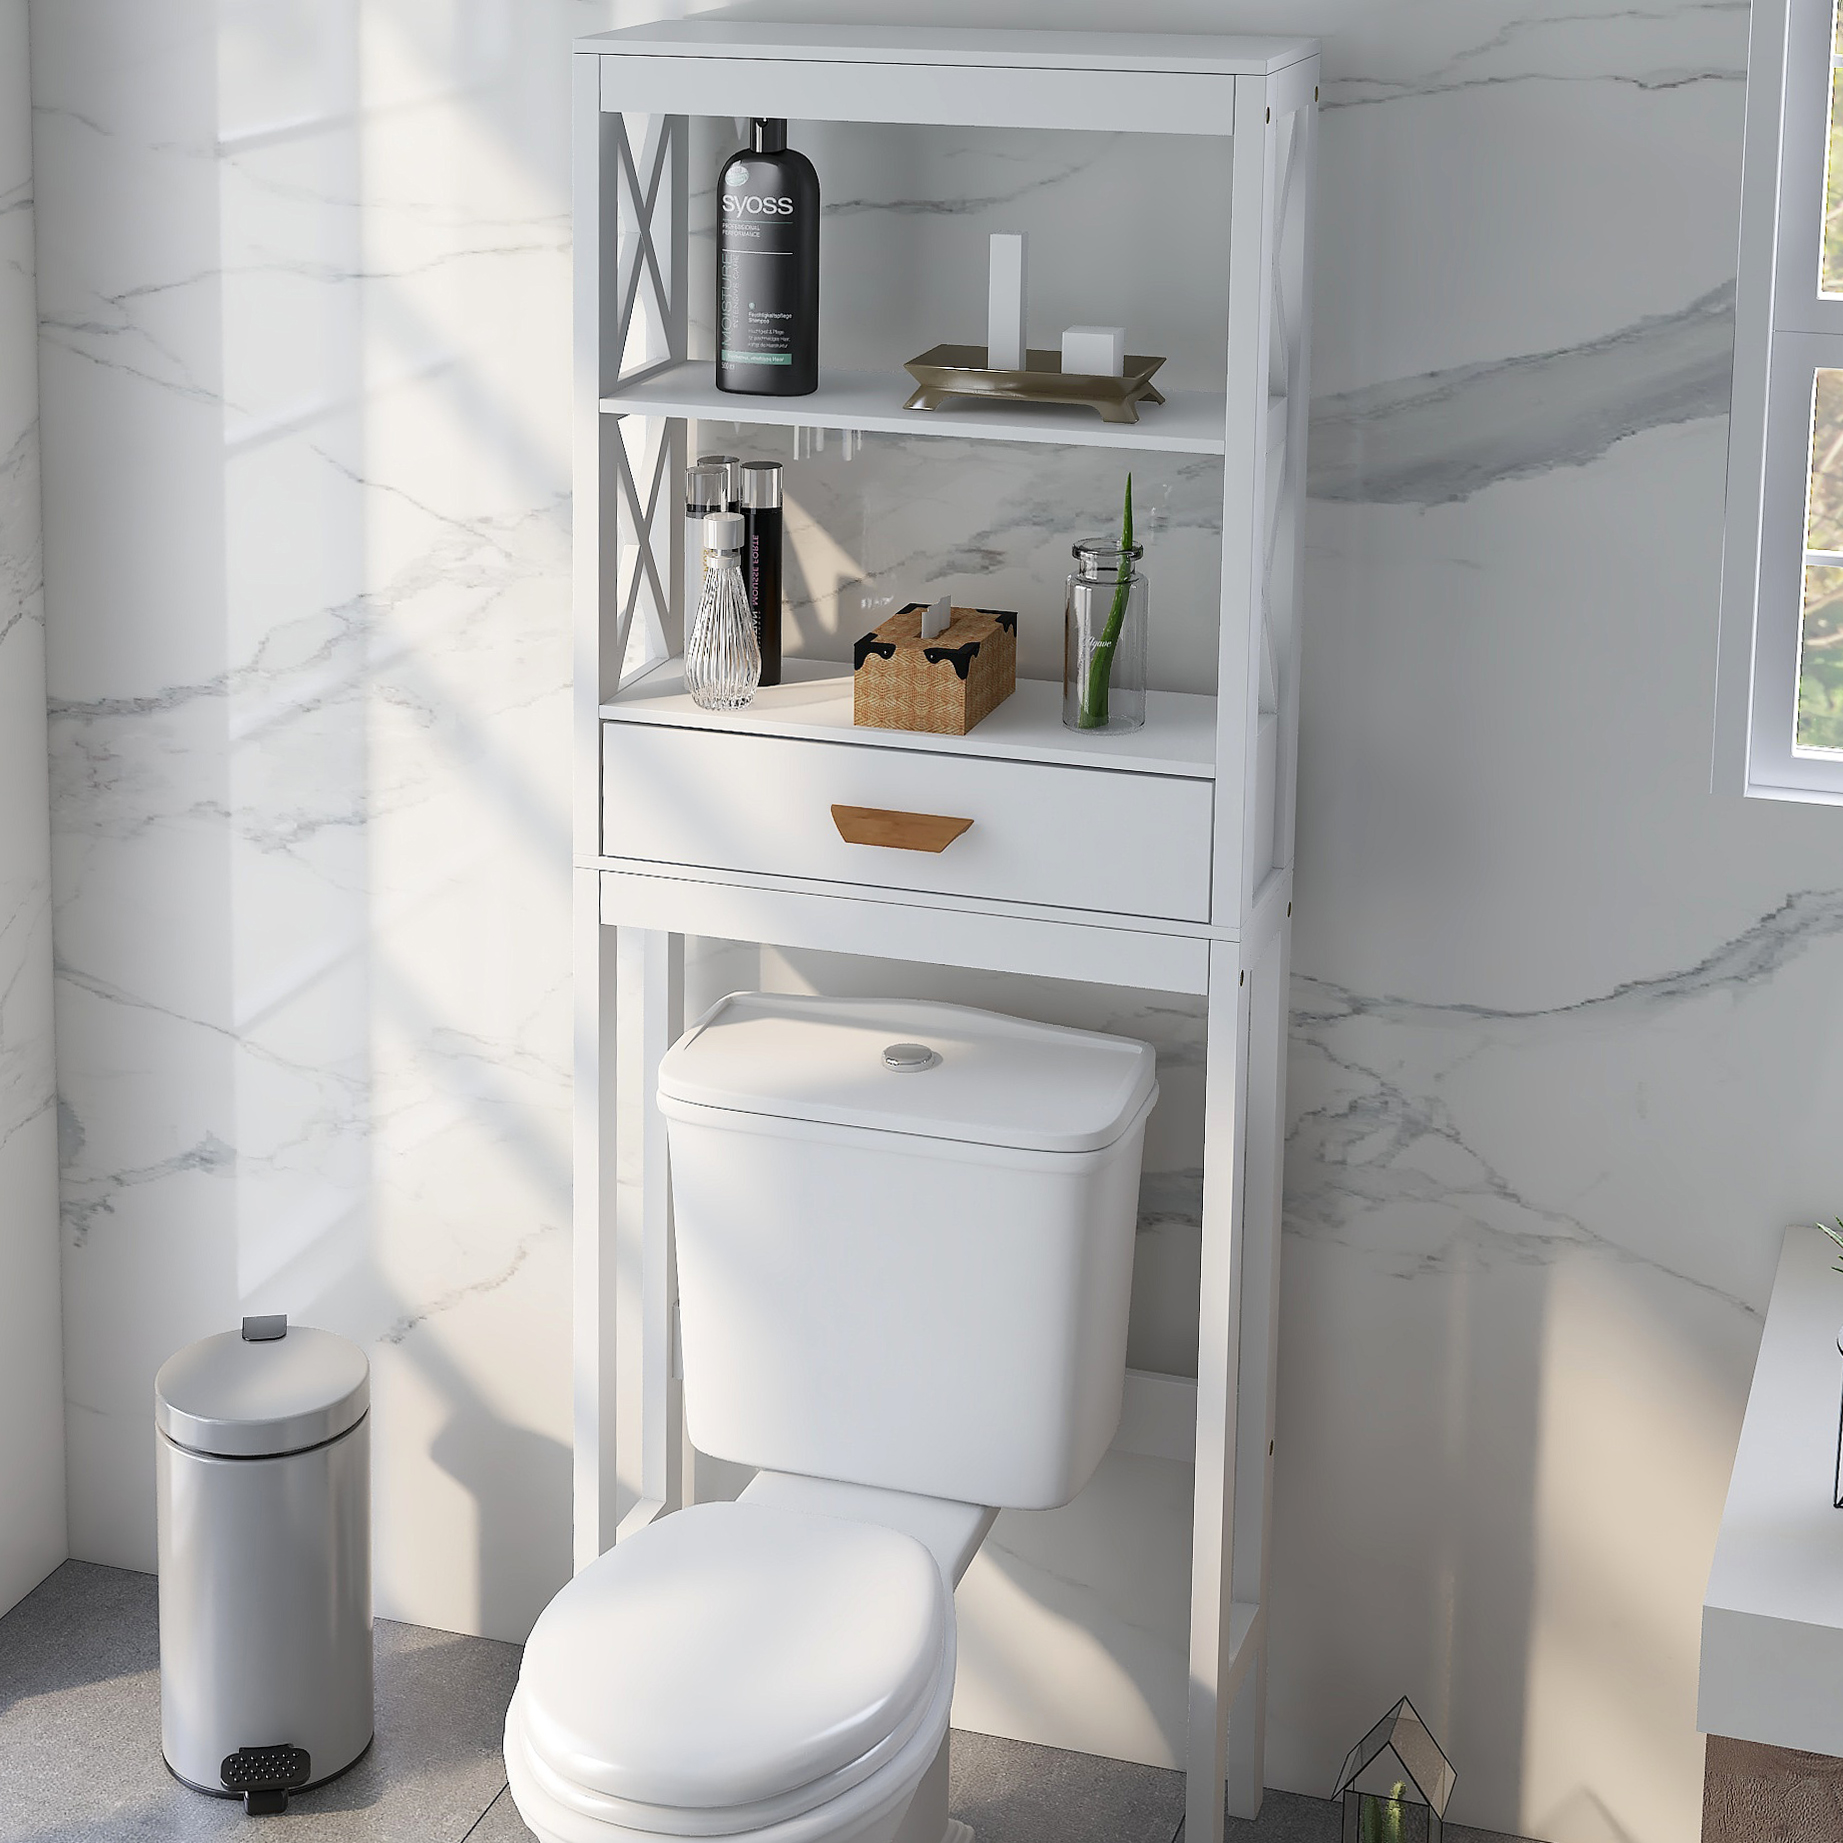 Tall Bathroom Storage Cabinet, Bathroom Furniture Over The Toilet, Freestanding Bathroom Cabinet with Two Open Shelves, Bathroom Hutch Over Toilet, Space Saving Toilet Shelf Organizer, K2510 - image 3 of 9